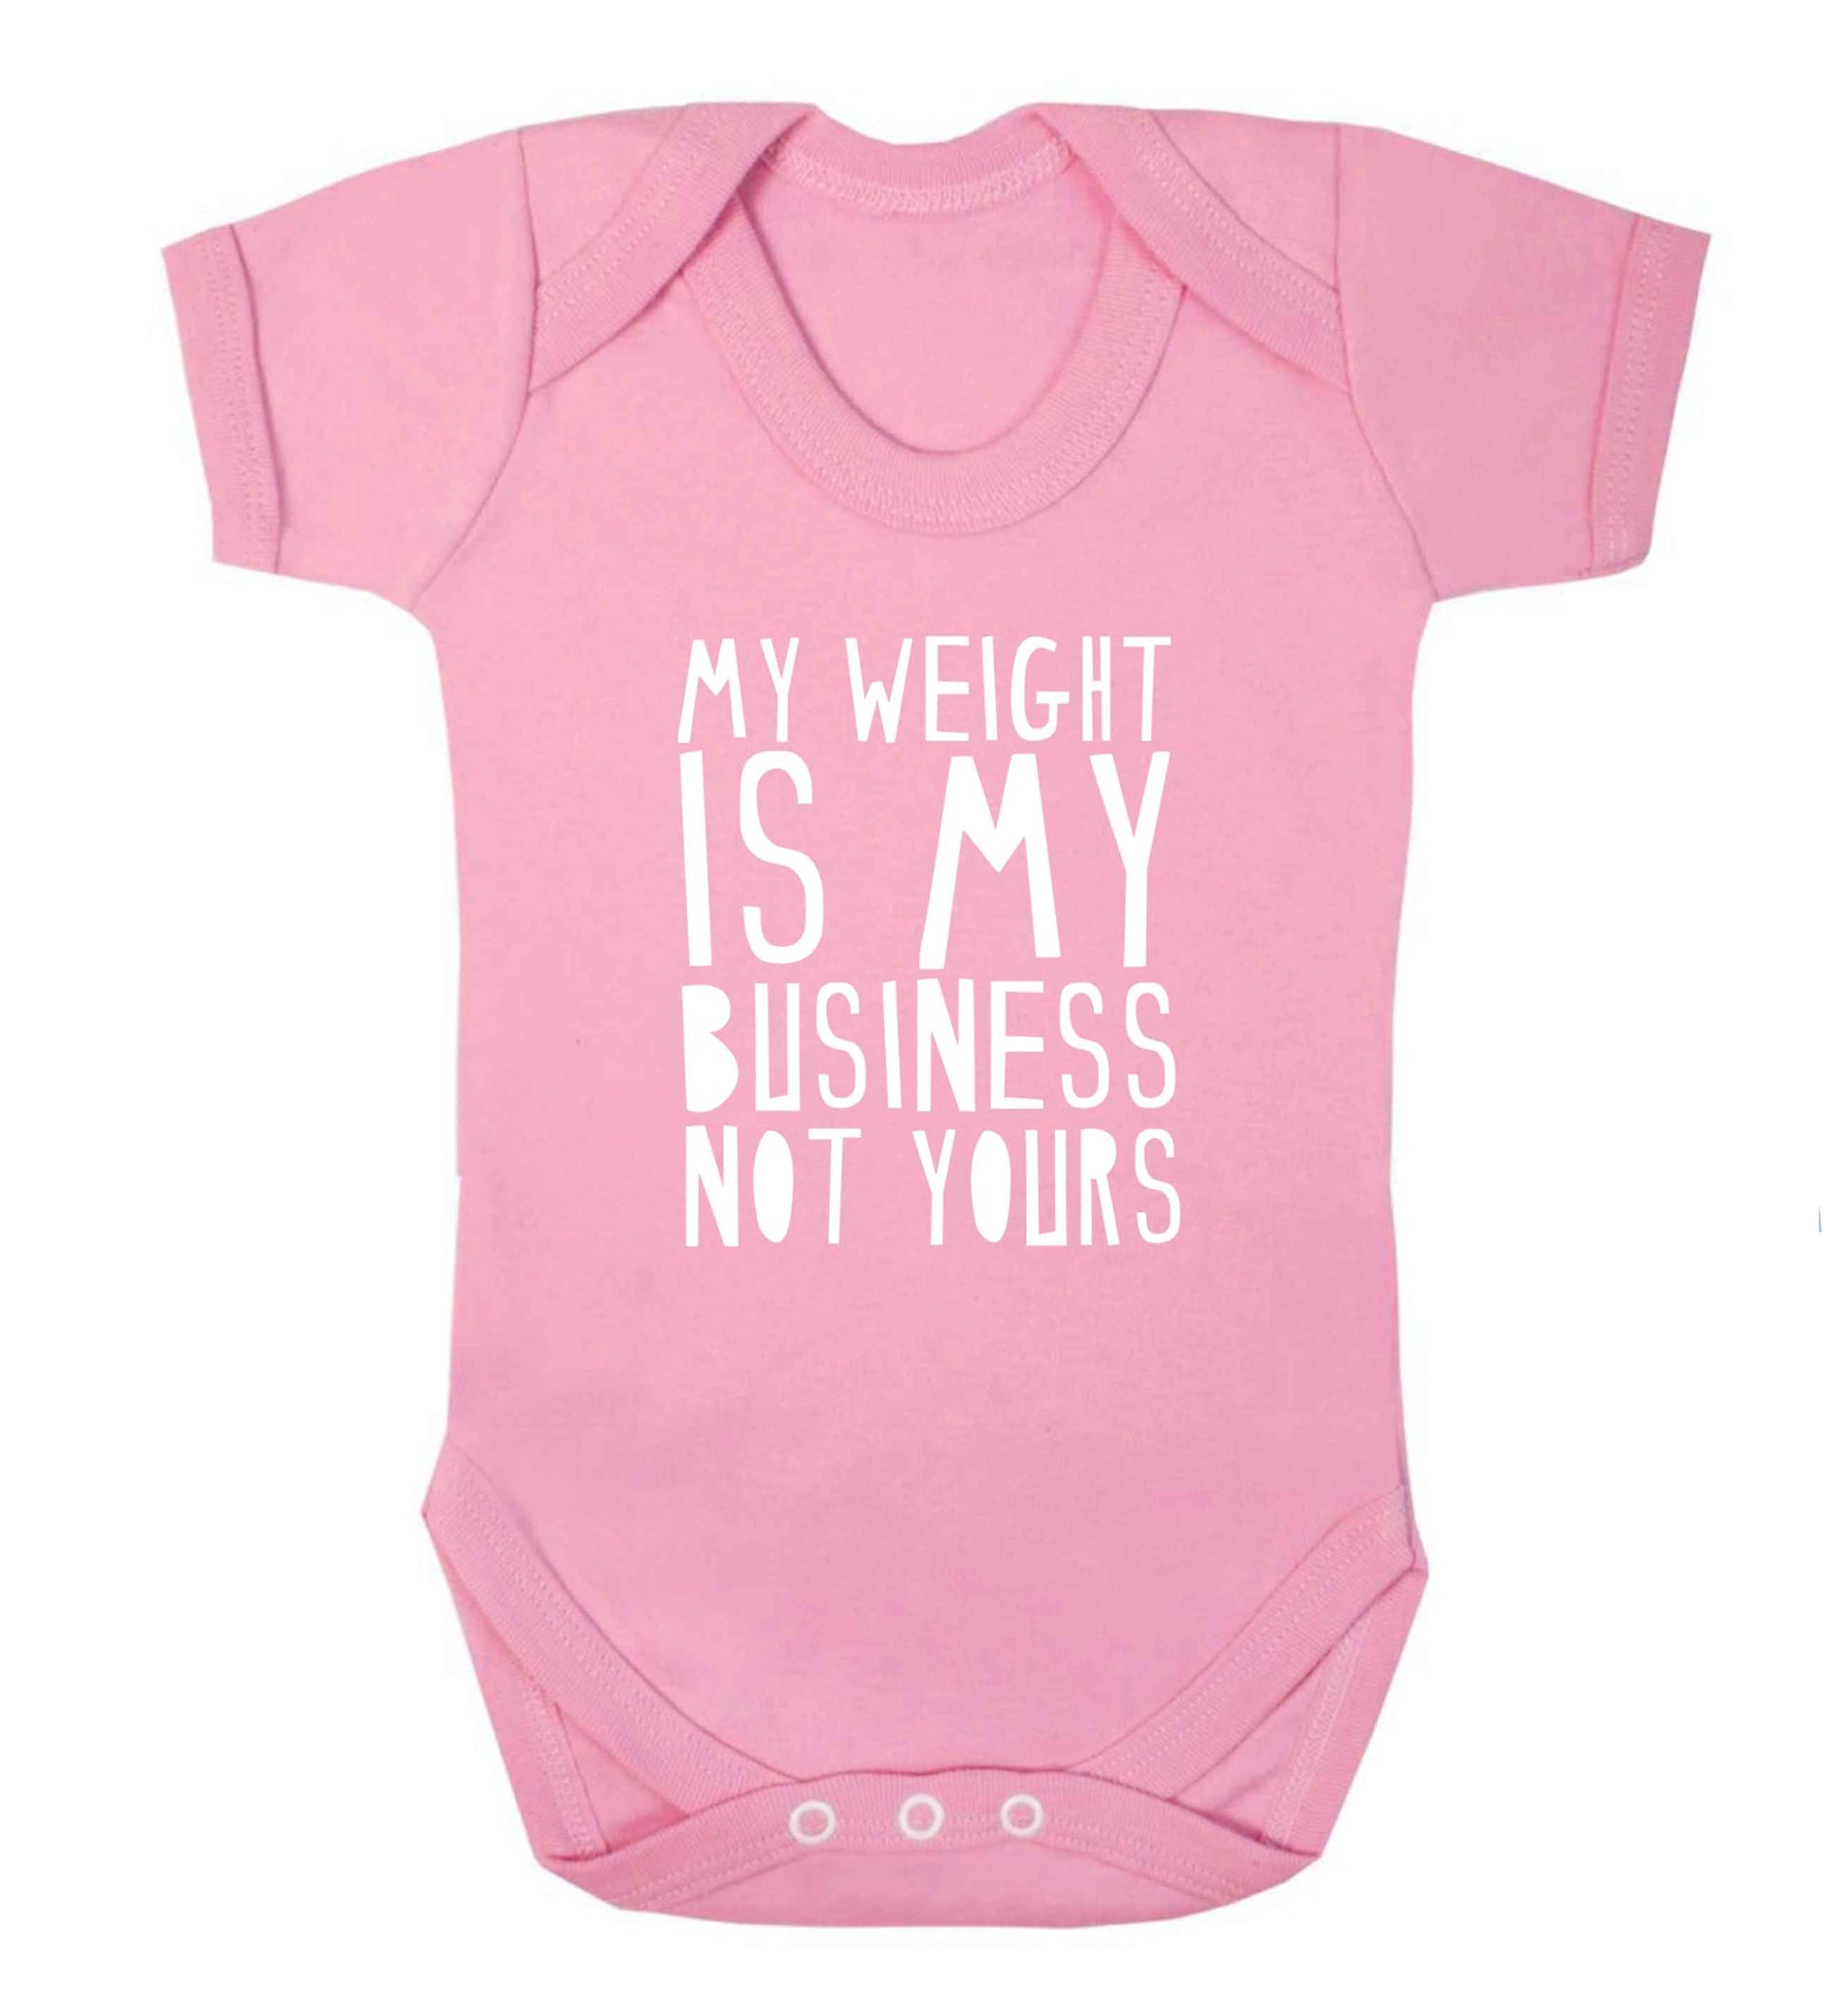 My weight is my business not yours baby vest pale pink 18-24 months